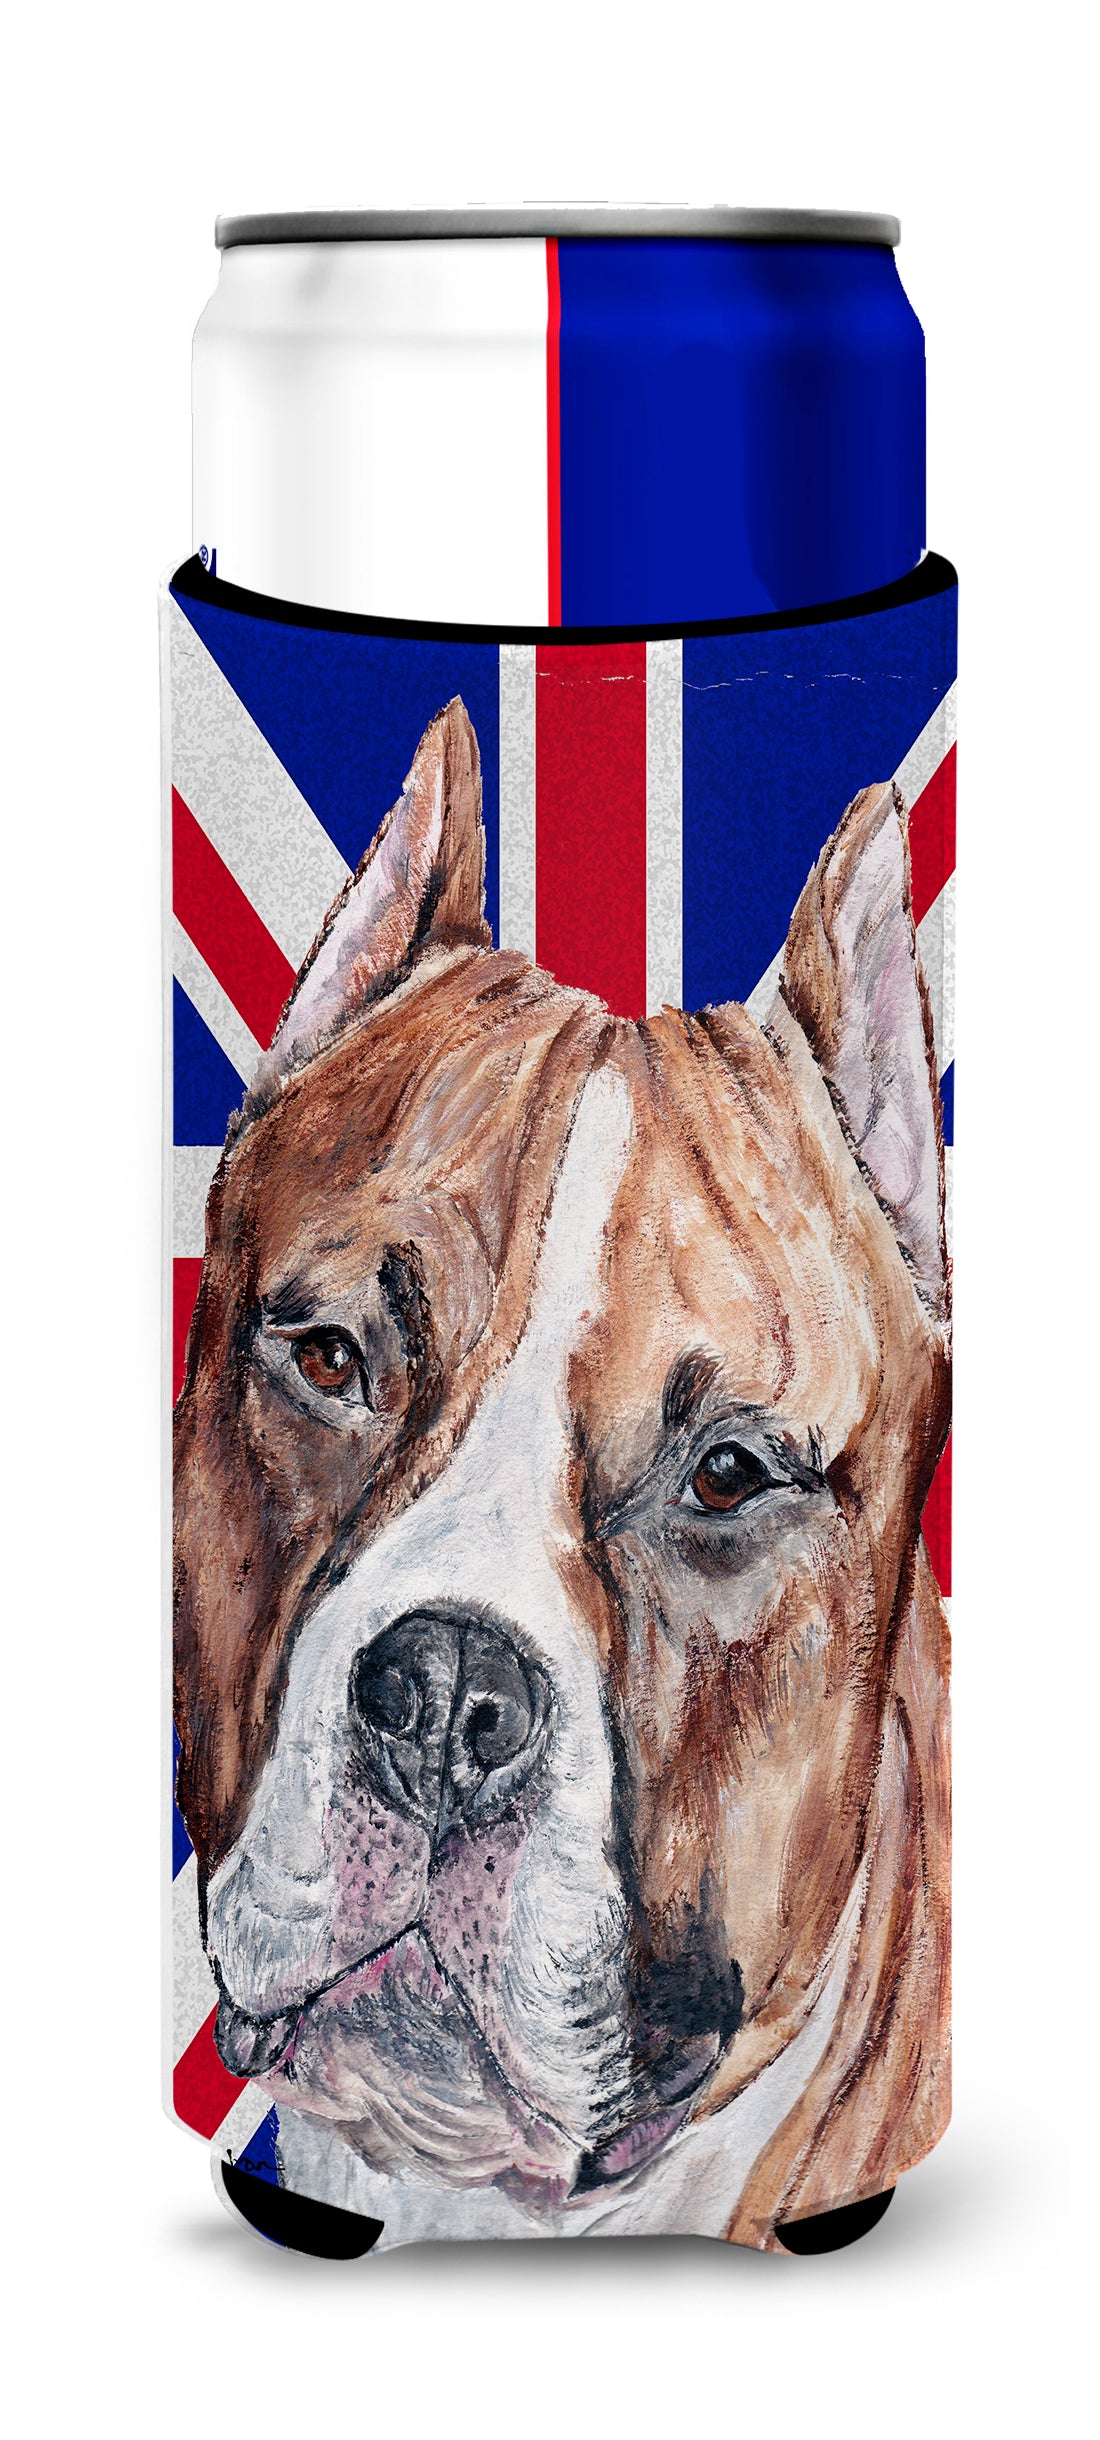 Staffordshire Bull Terrier Staffie with English Union Jack British Flag Ultra Beverage Insulators for slim cans SC9883MUK.